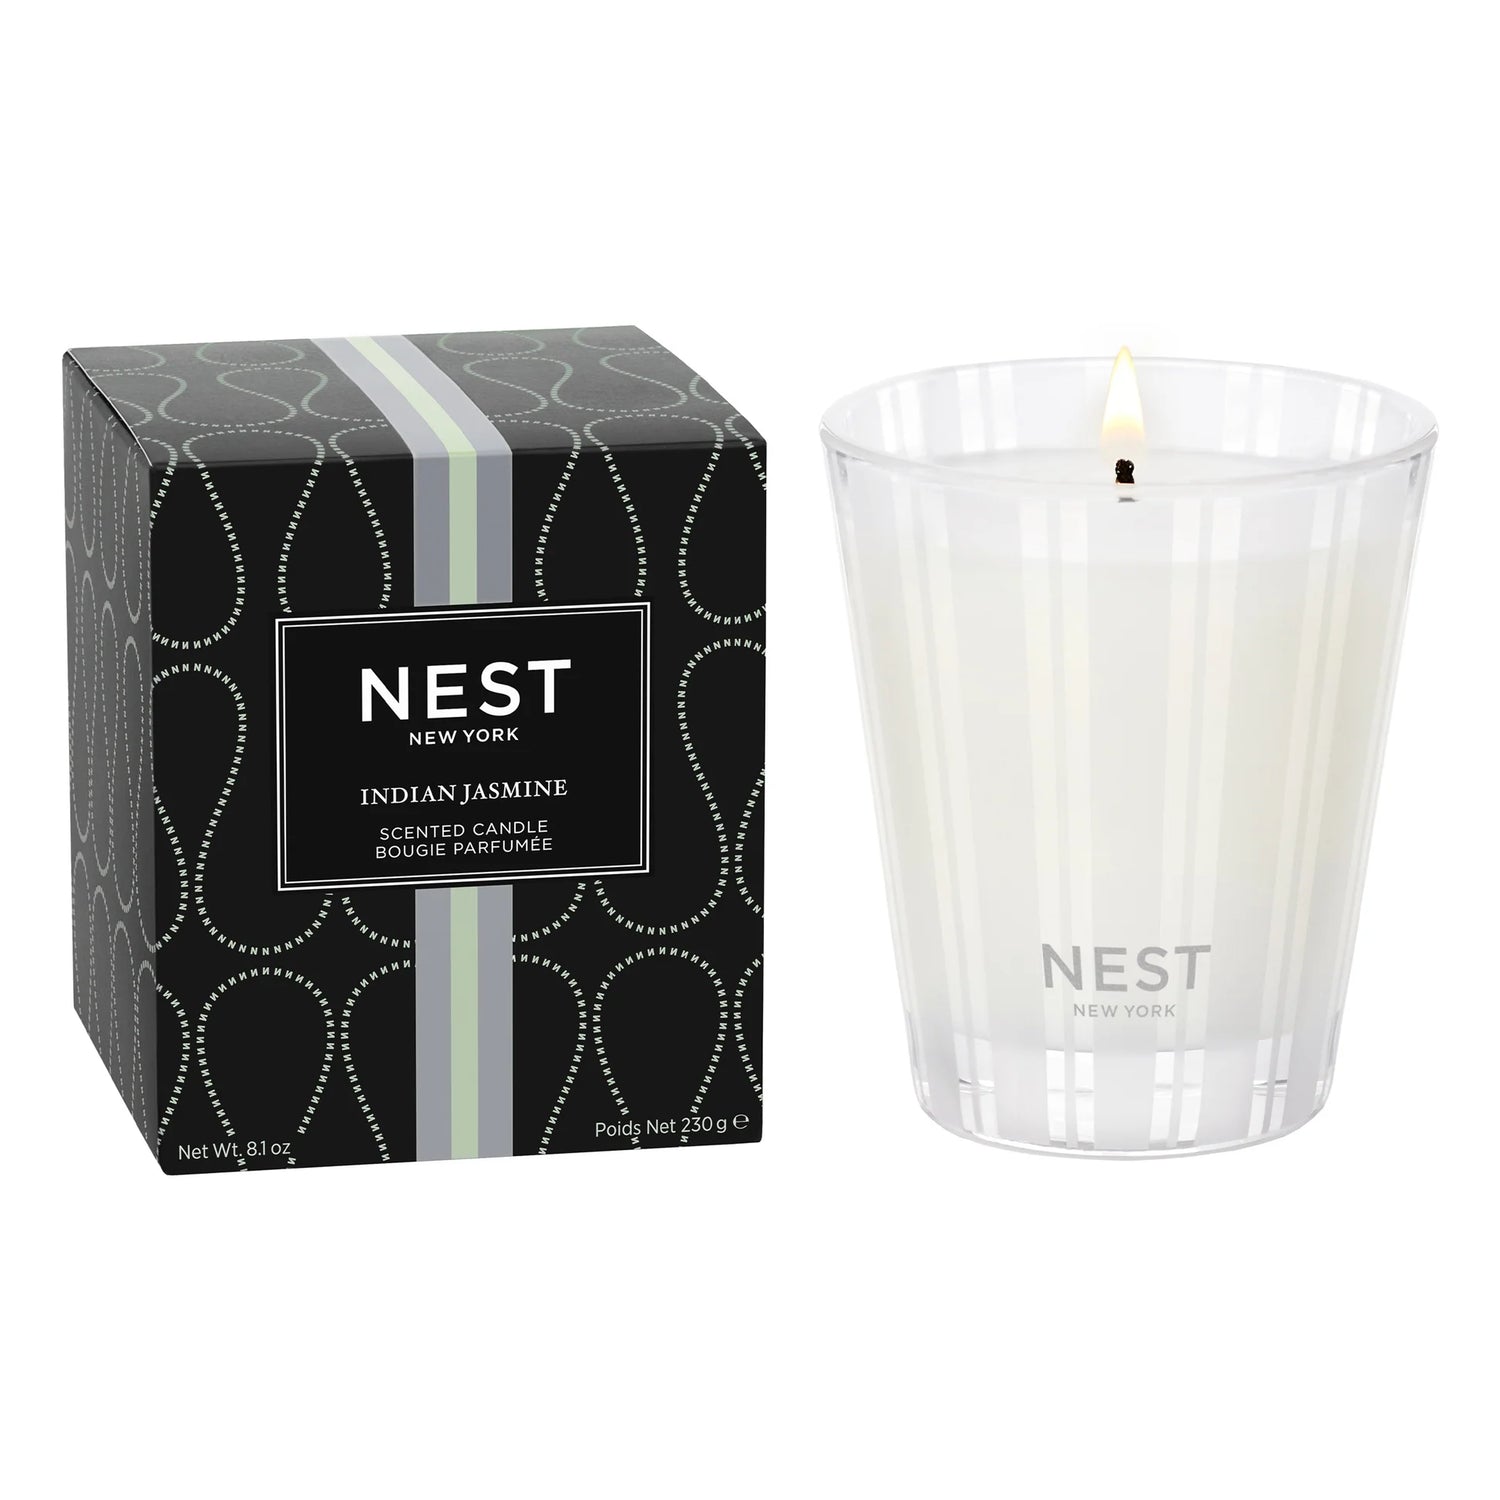 NEST Classic Candle - Multiple Options